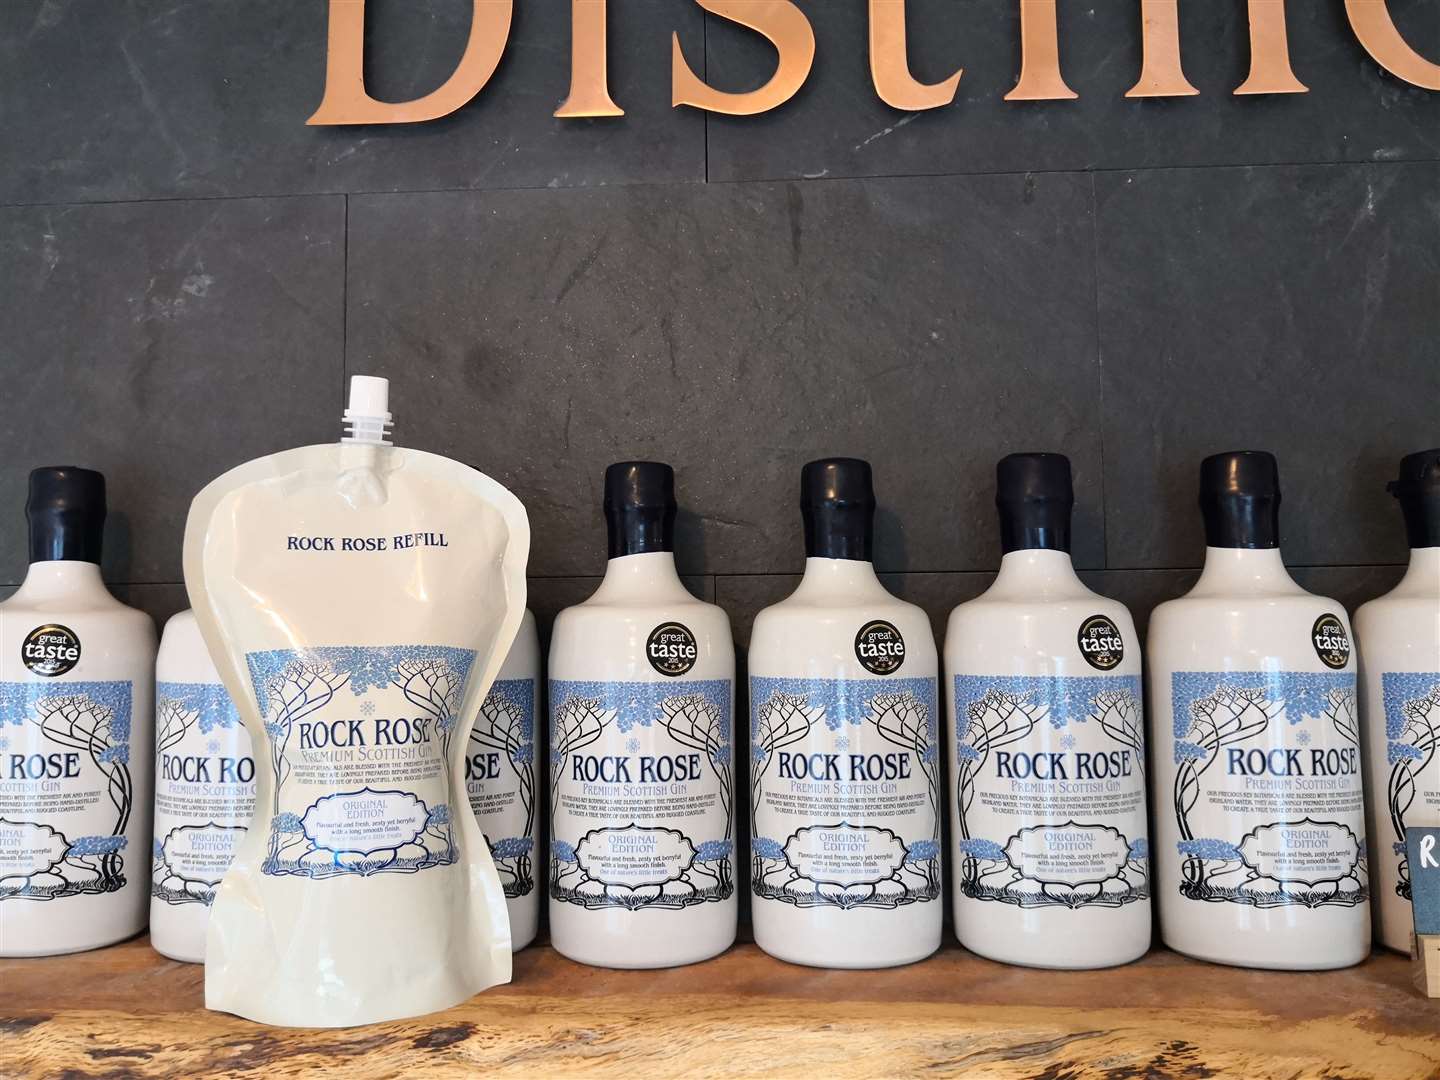 If consumers already have one of the collectable ceramic gin bottles, they can order the pouches for £4 less than the price of ordering a new bottle.